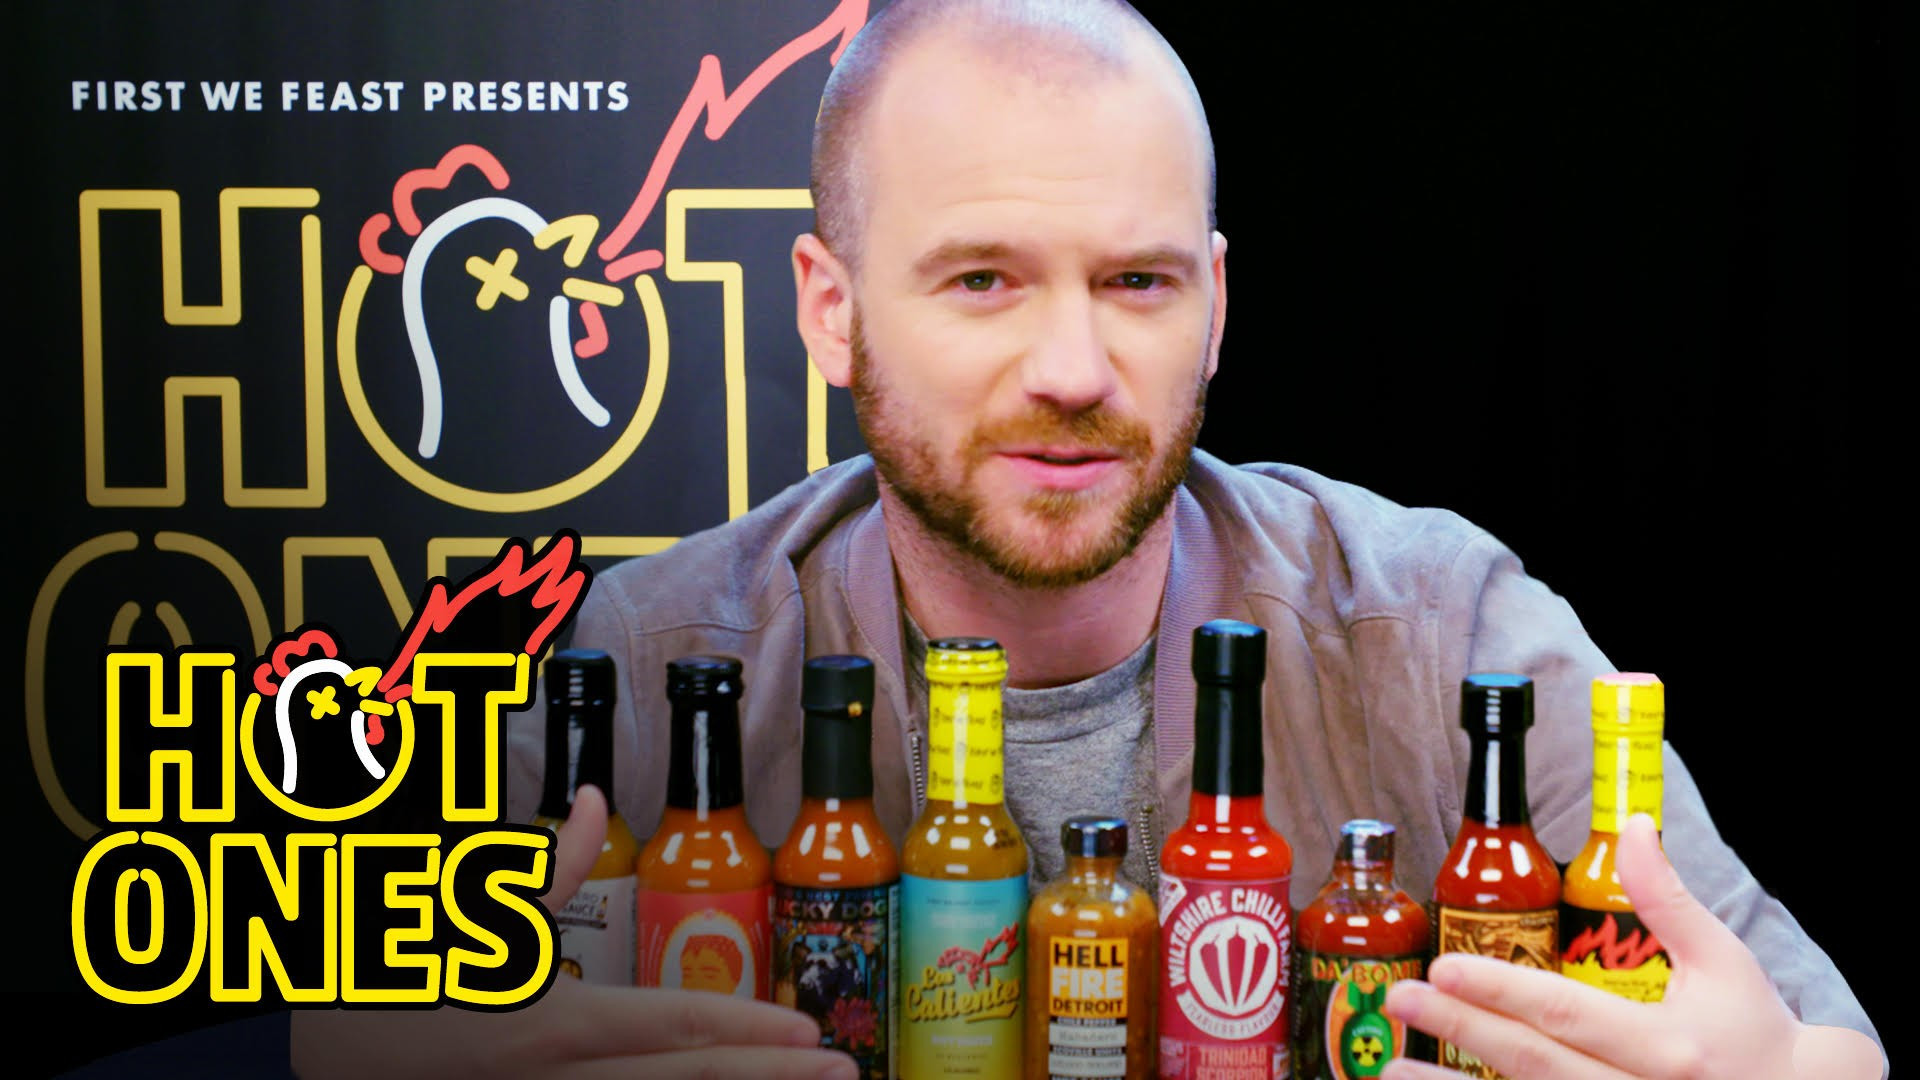 First We Feast Hot Sauces
 HellFire Detroit hot sauce is on the new season of Hot